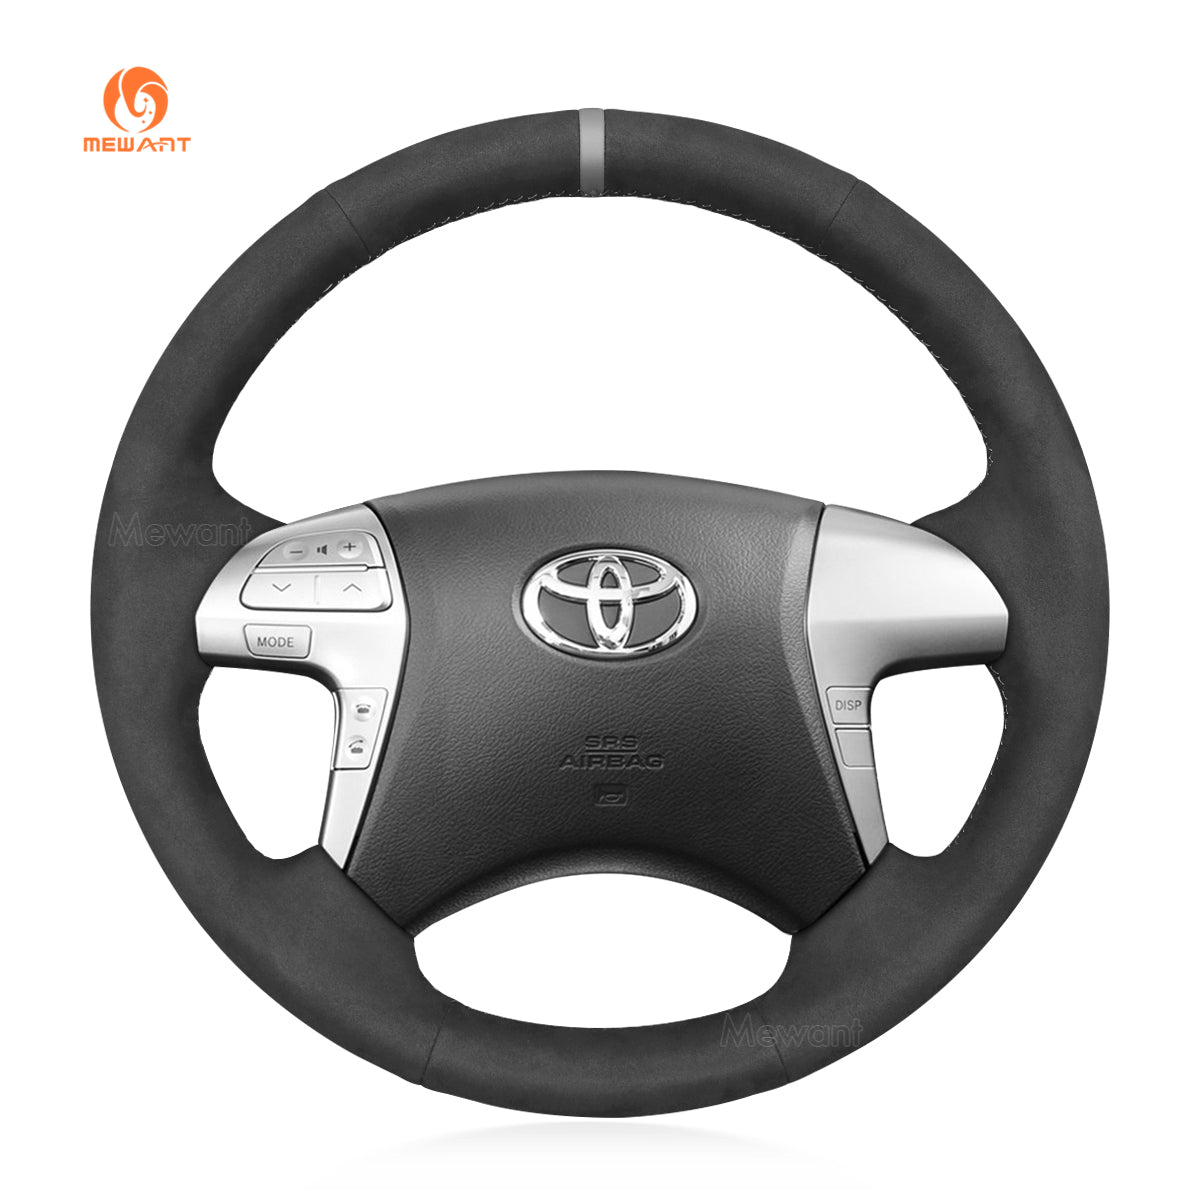 MEWANT Hand Stitch Car Steering Wheel Cover for Toyota Hilux 2011-2015